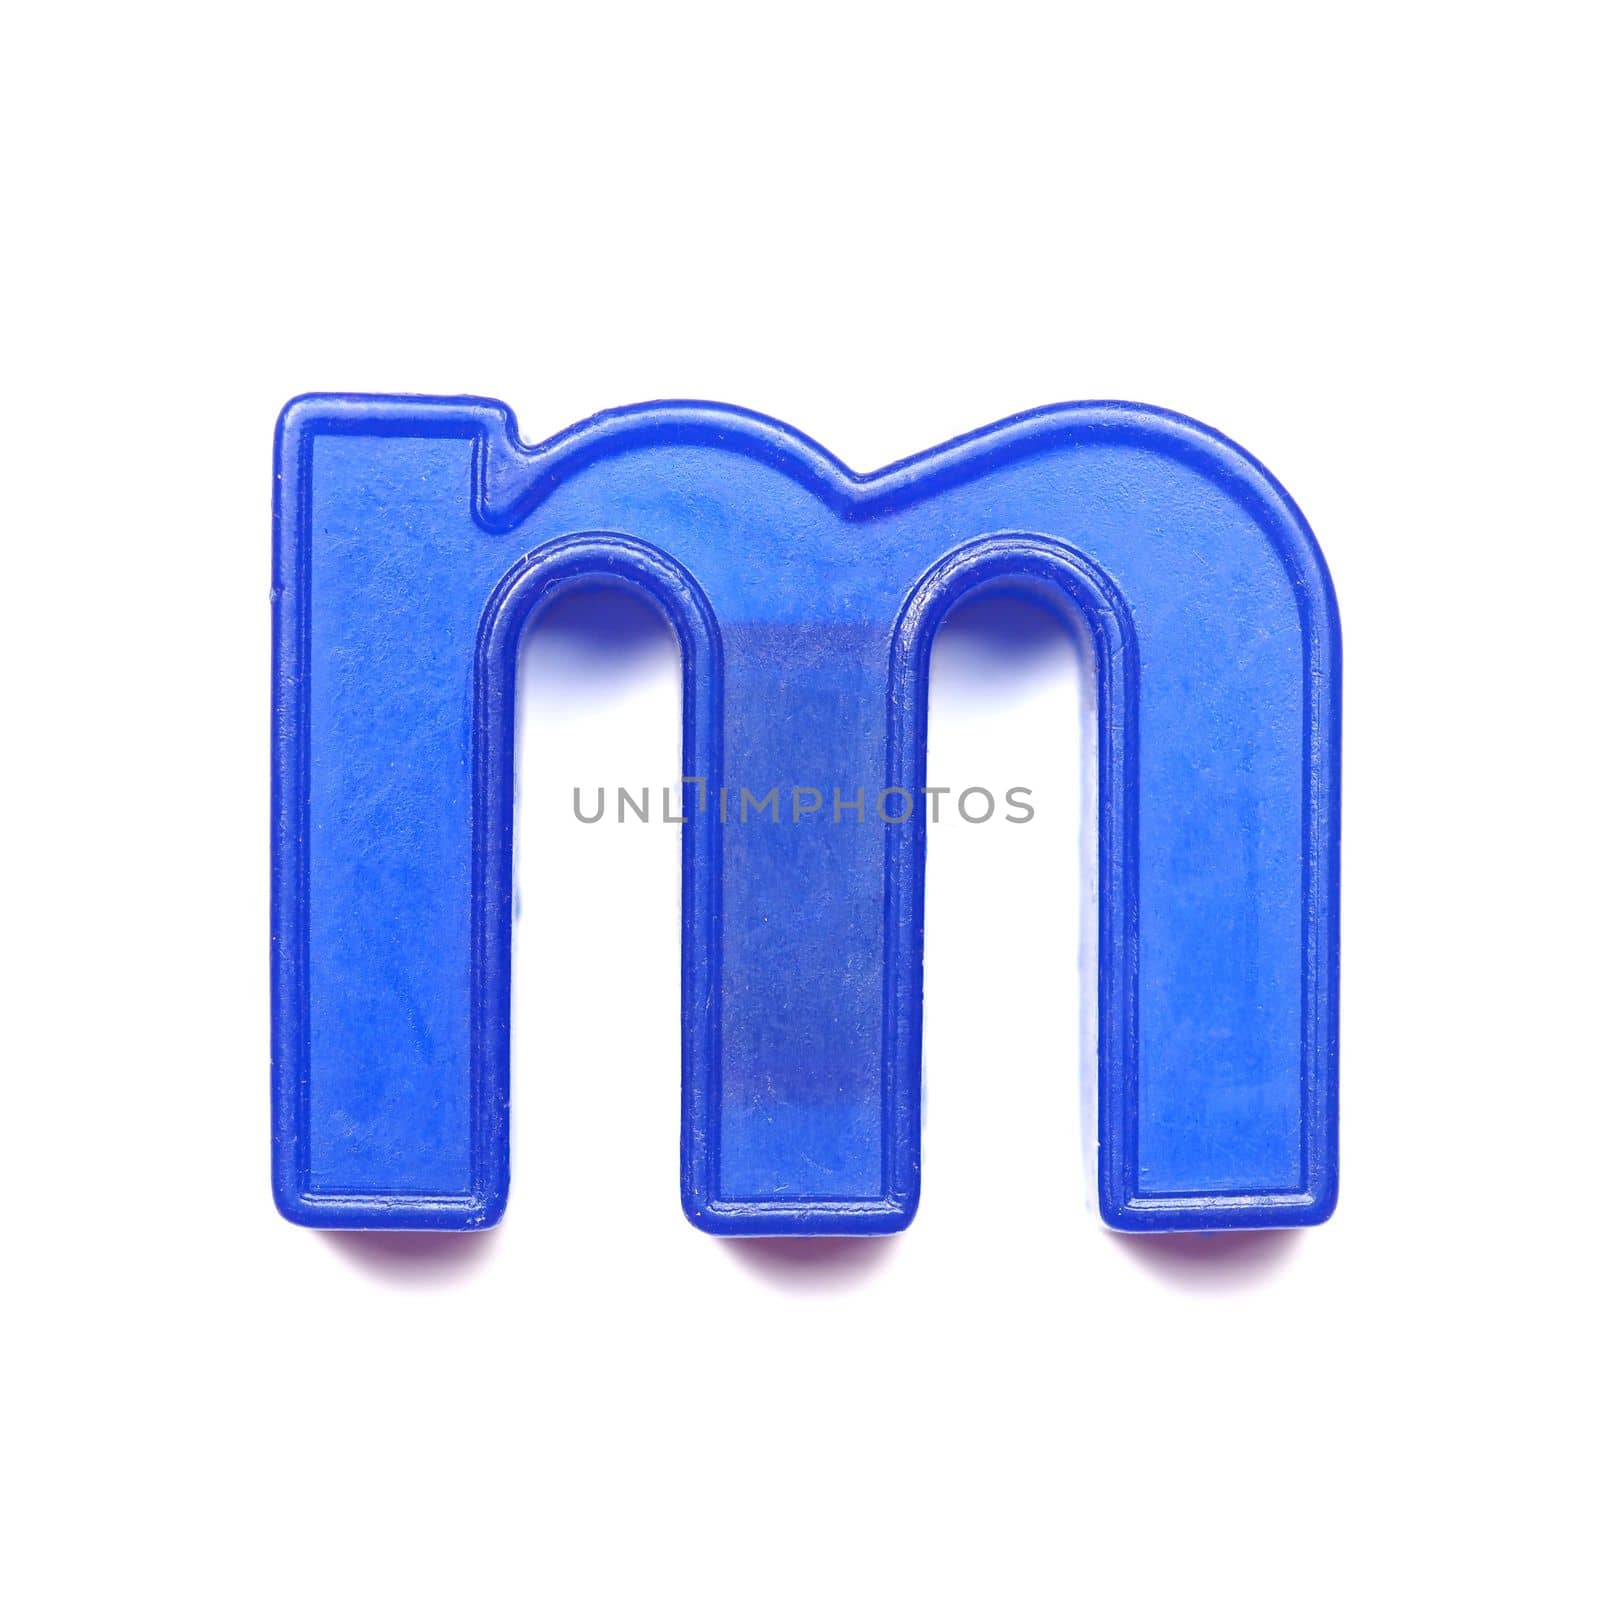 Magnetic lowercase letter M of the British alphabet